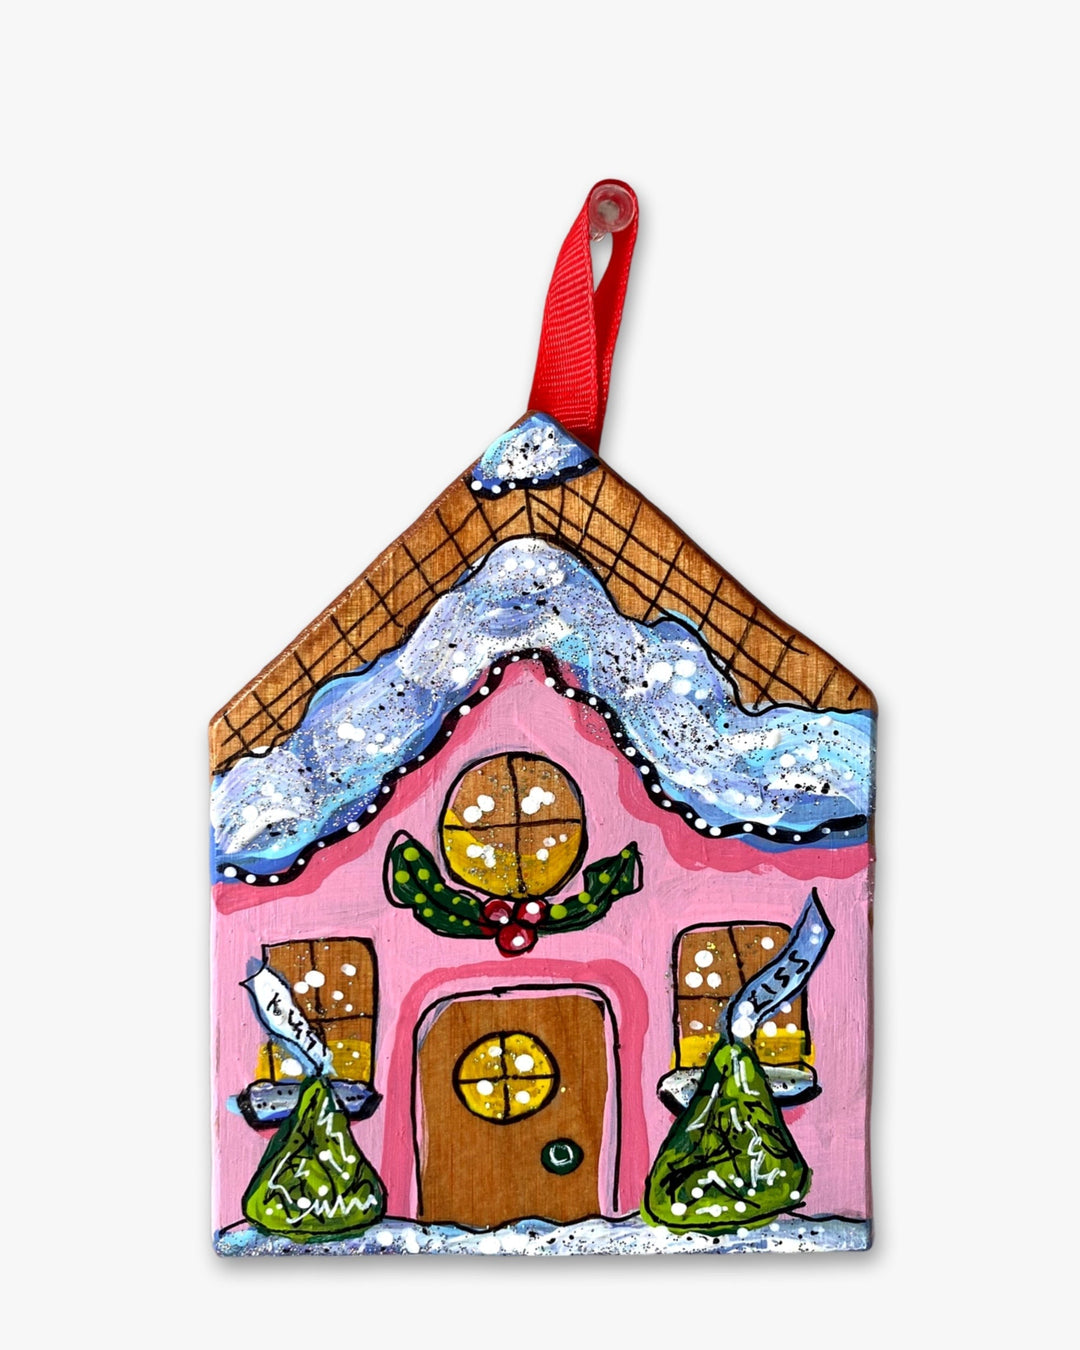 Pink Kiss Frosting Gingerbread House - Hand Painted Ornament - Heather Freitas 